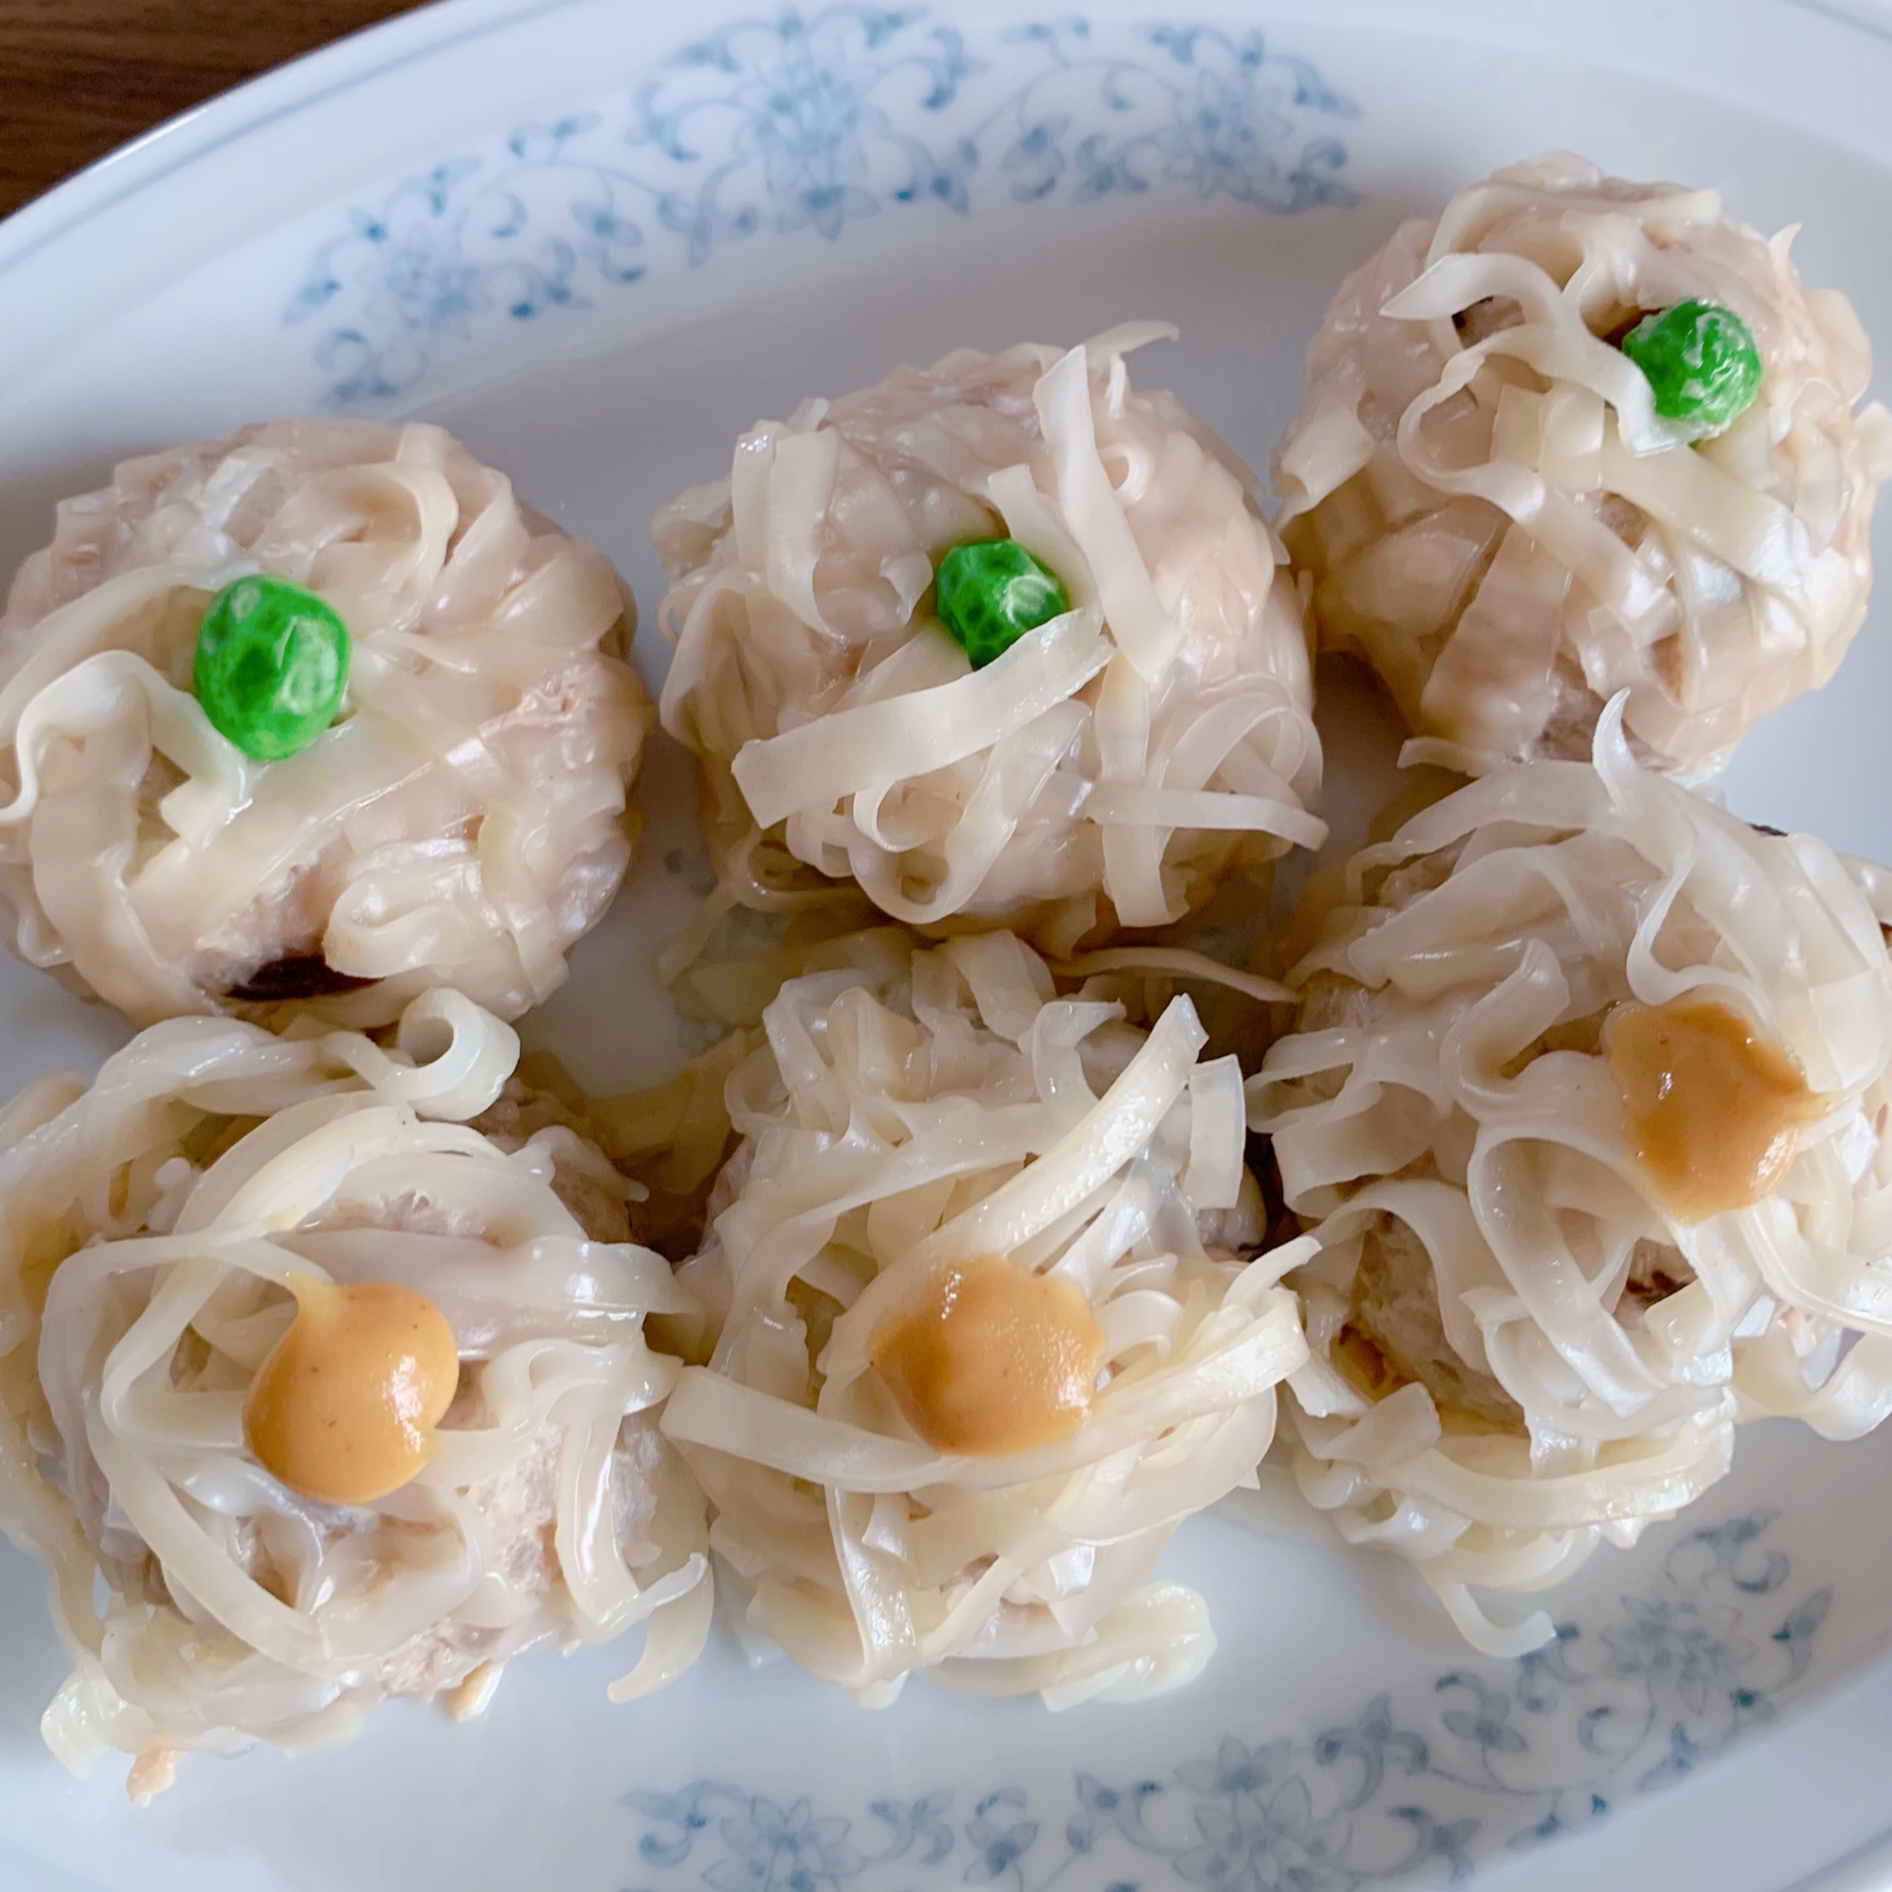 Shumai is a dumpling made by stuffing meat into a thin wheat flour skin.